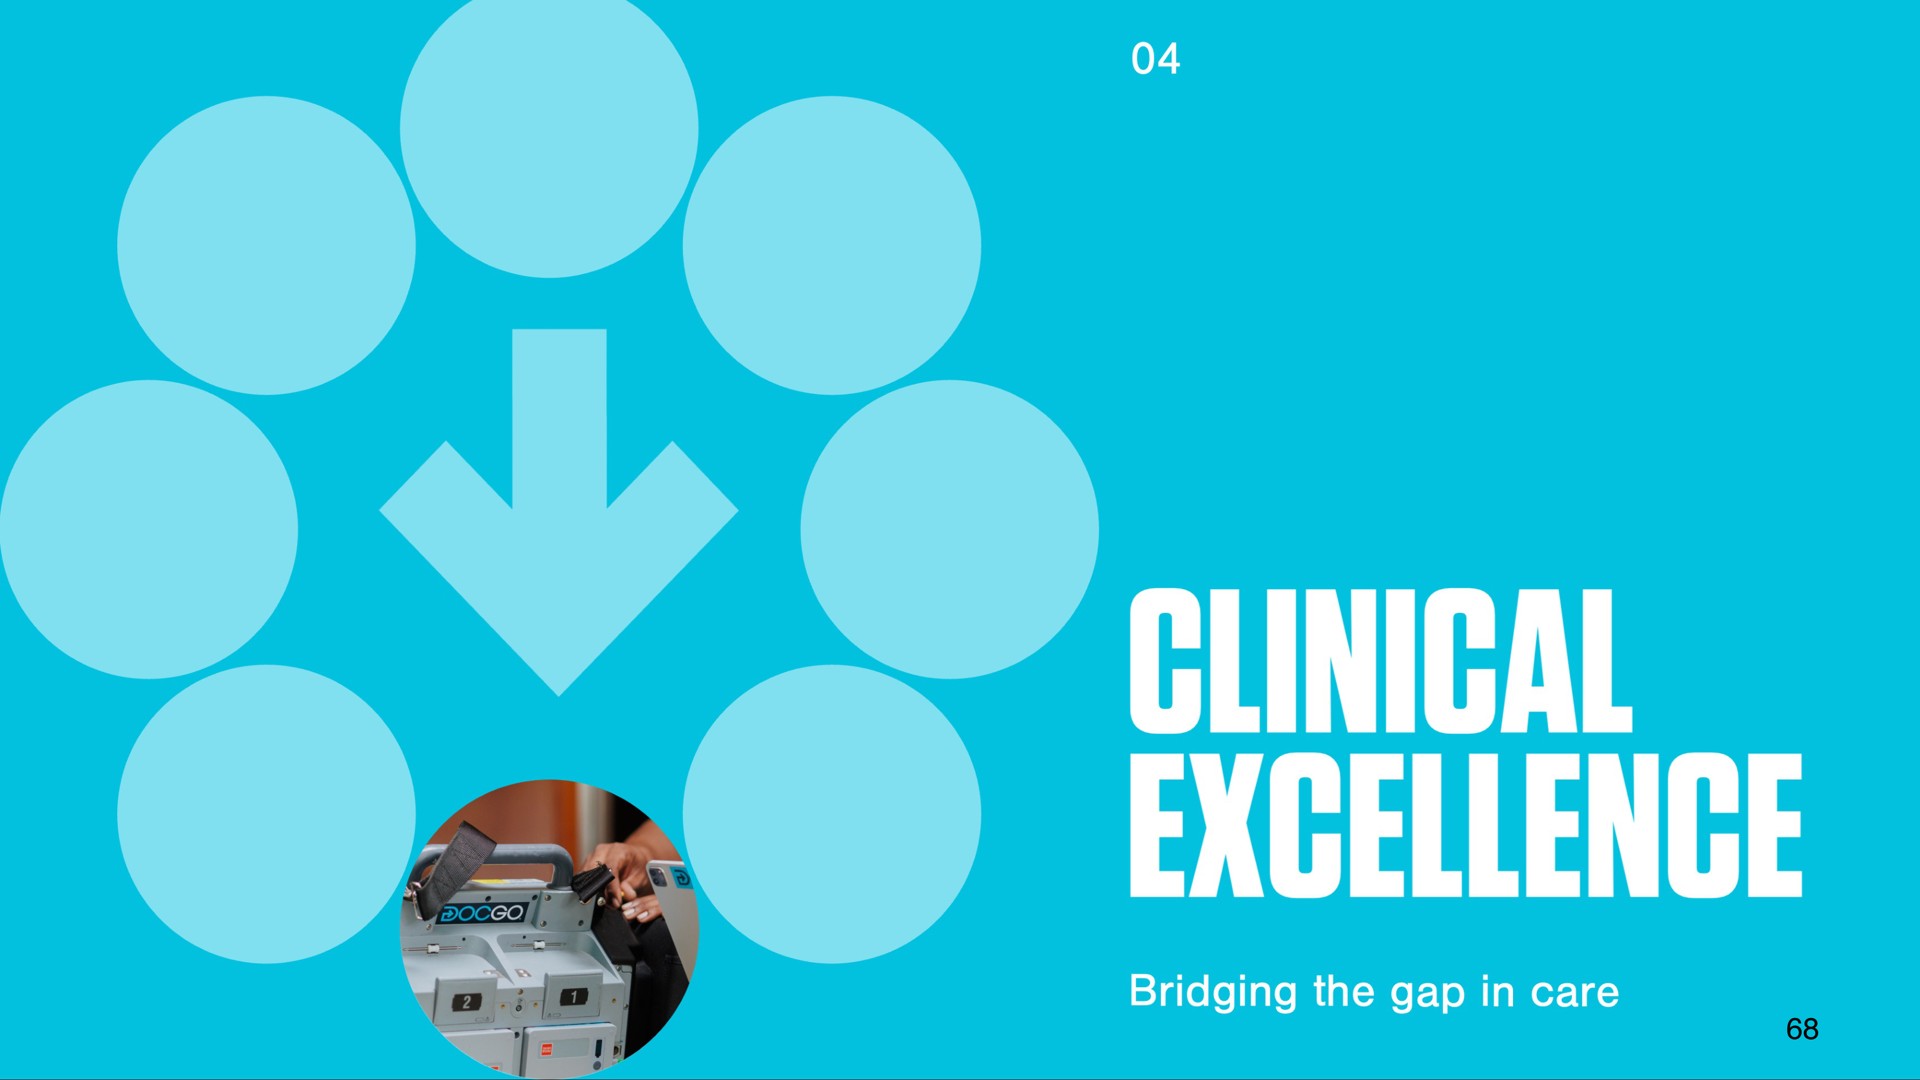 bridging the gap in care clinical excellence | DocGo